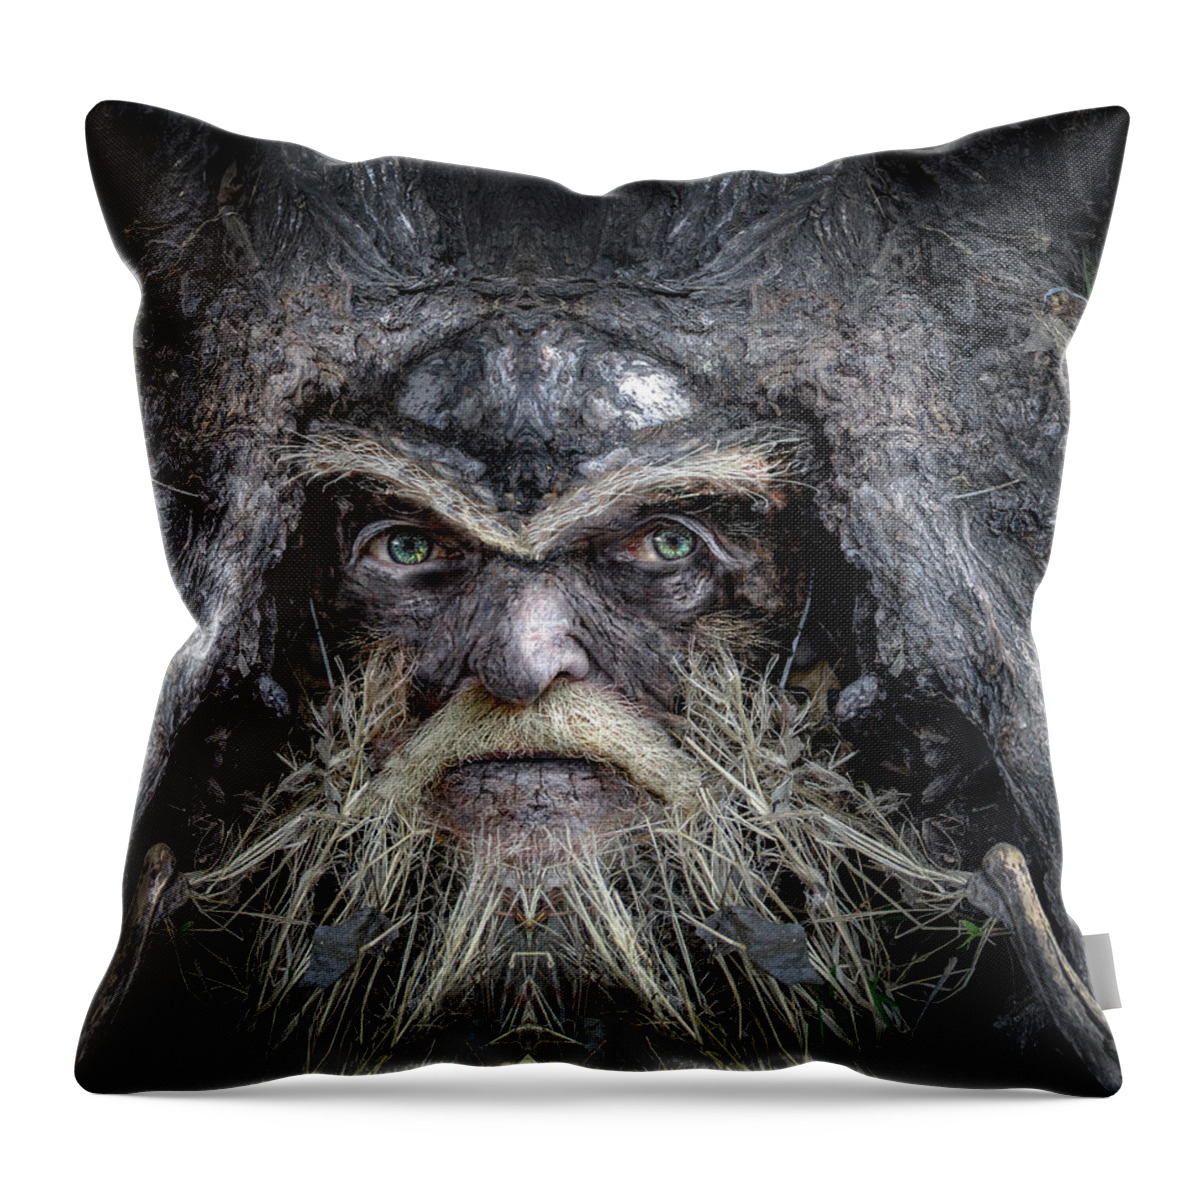 Wood Throw Pillow featuring the digital art Wally Woodfury by Rick Mosher